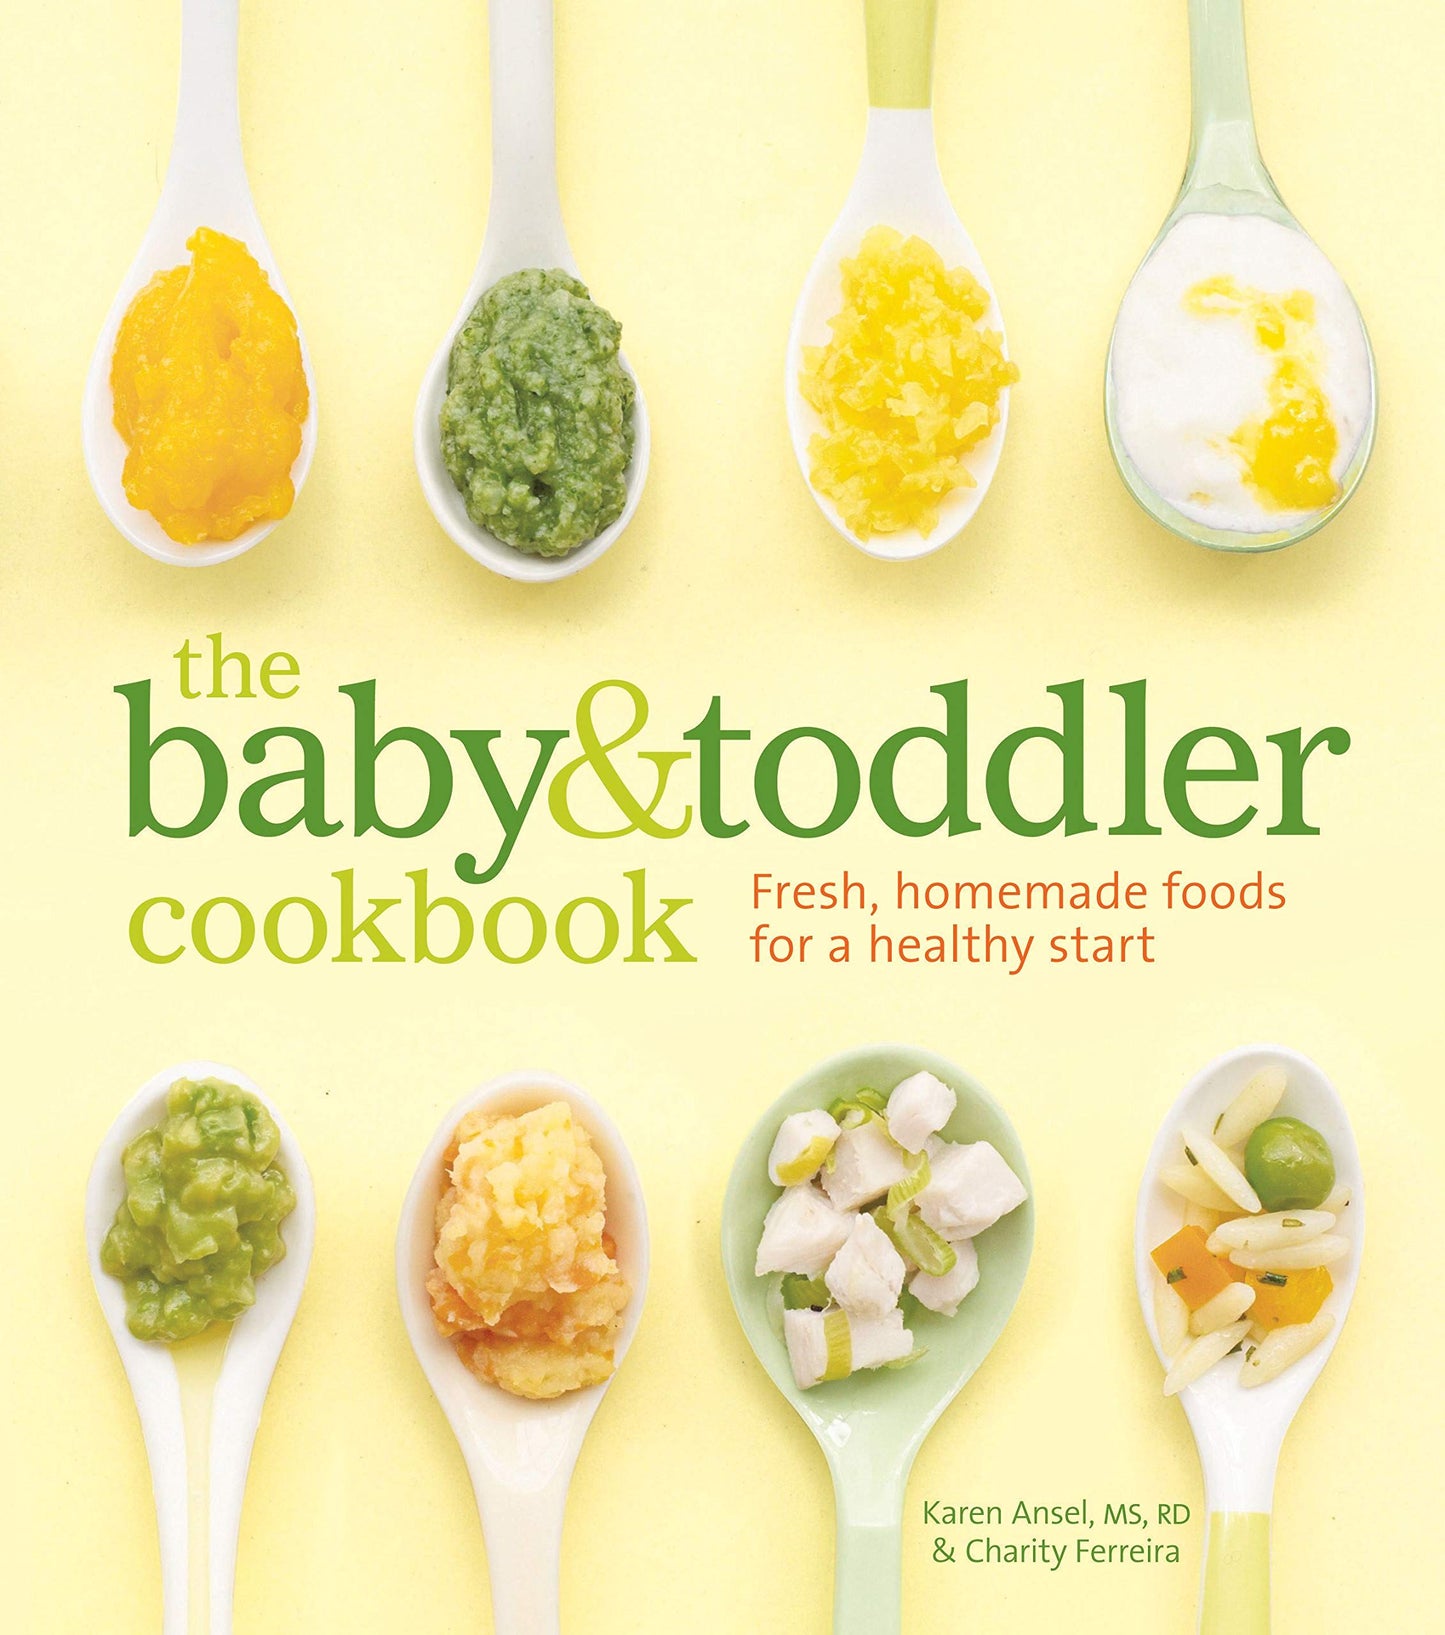 THE BABY & TODDLER COOKBOOK